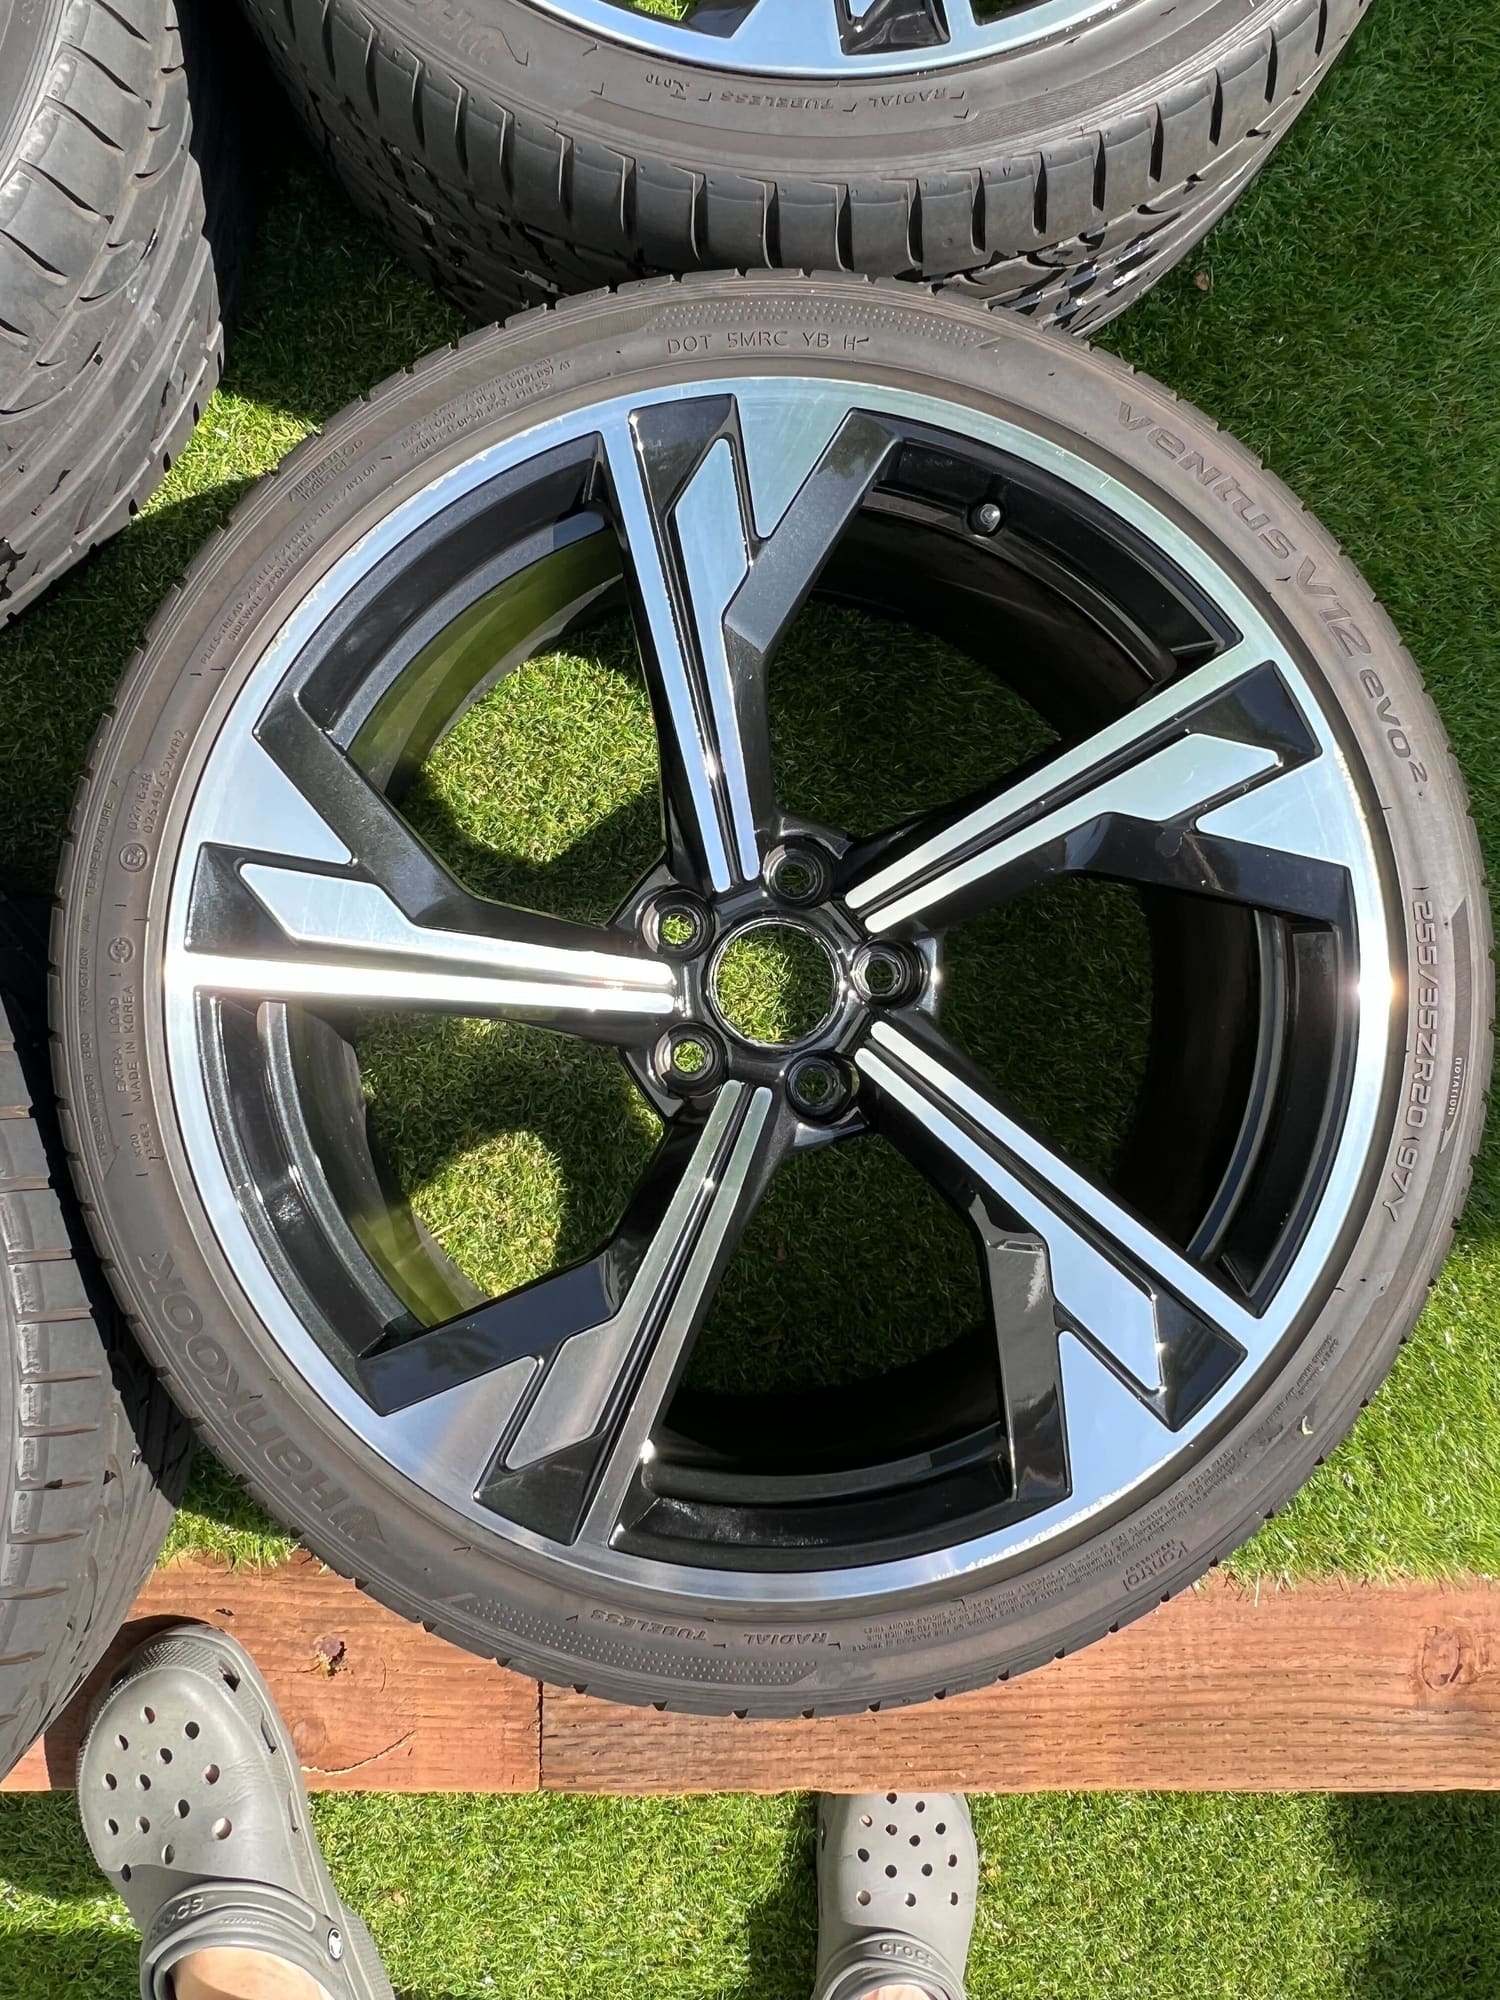 Wheels and Tires/Axles - 20" RS5 5-Arm Flag Sport Wheels - Used - 2017 to 2022 Audi RS5 Sportback - 2017 to 2022 Audi A4 allroad - Los Angeles, CA 90065, United States